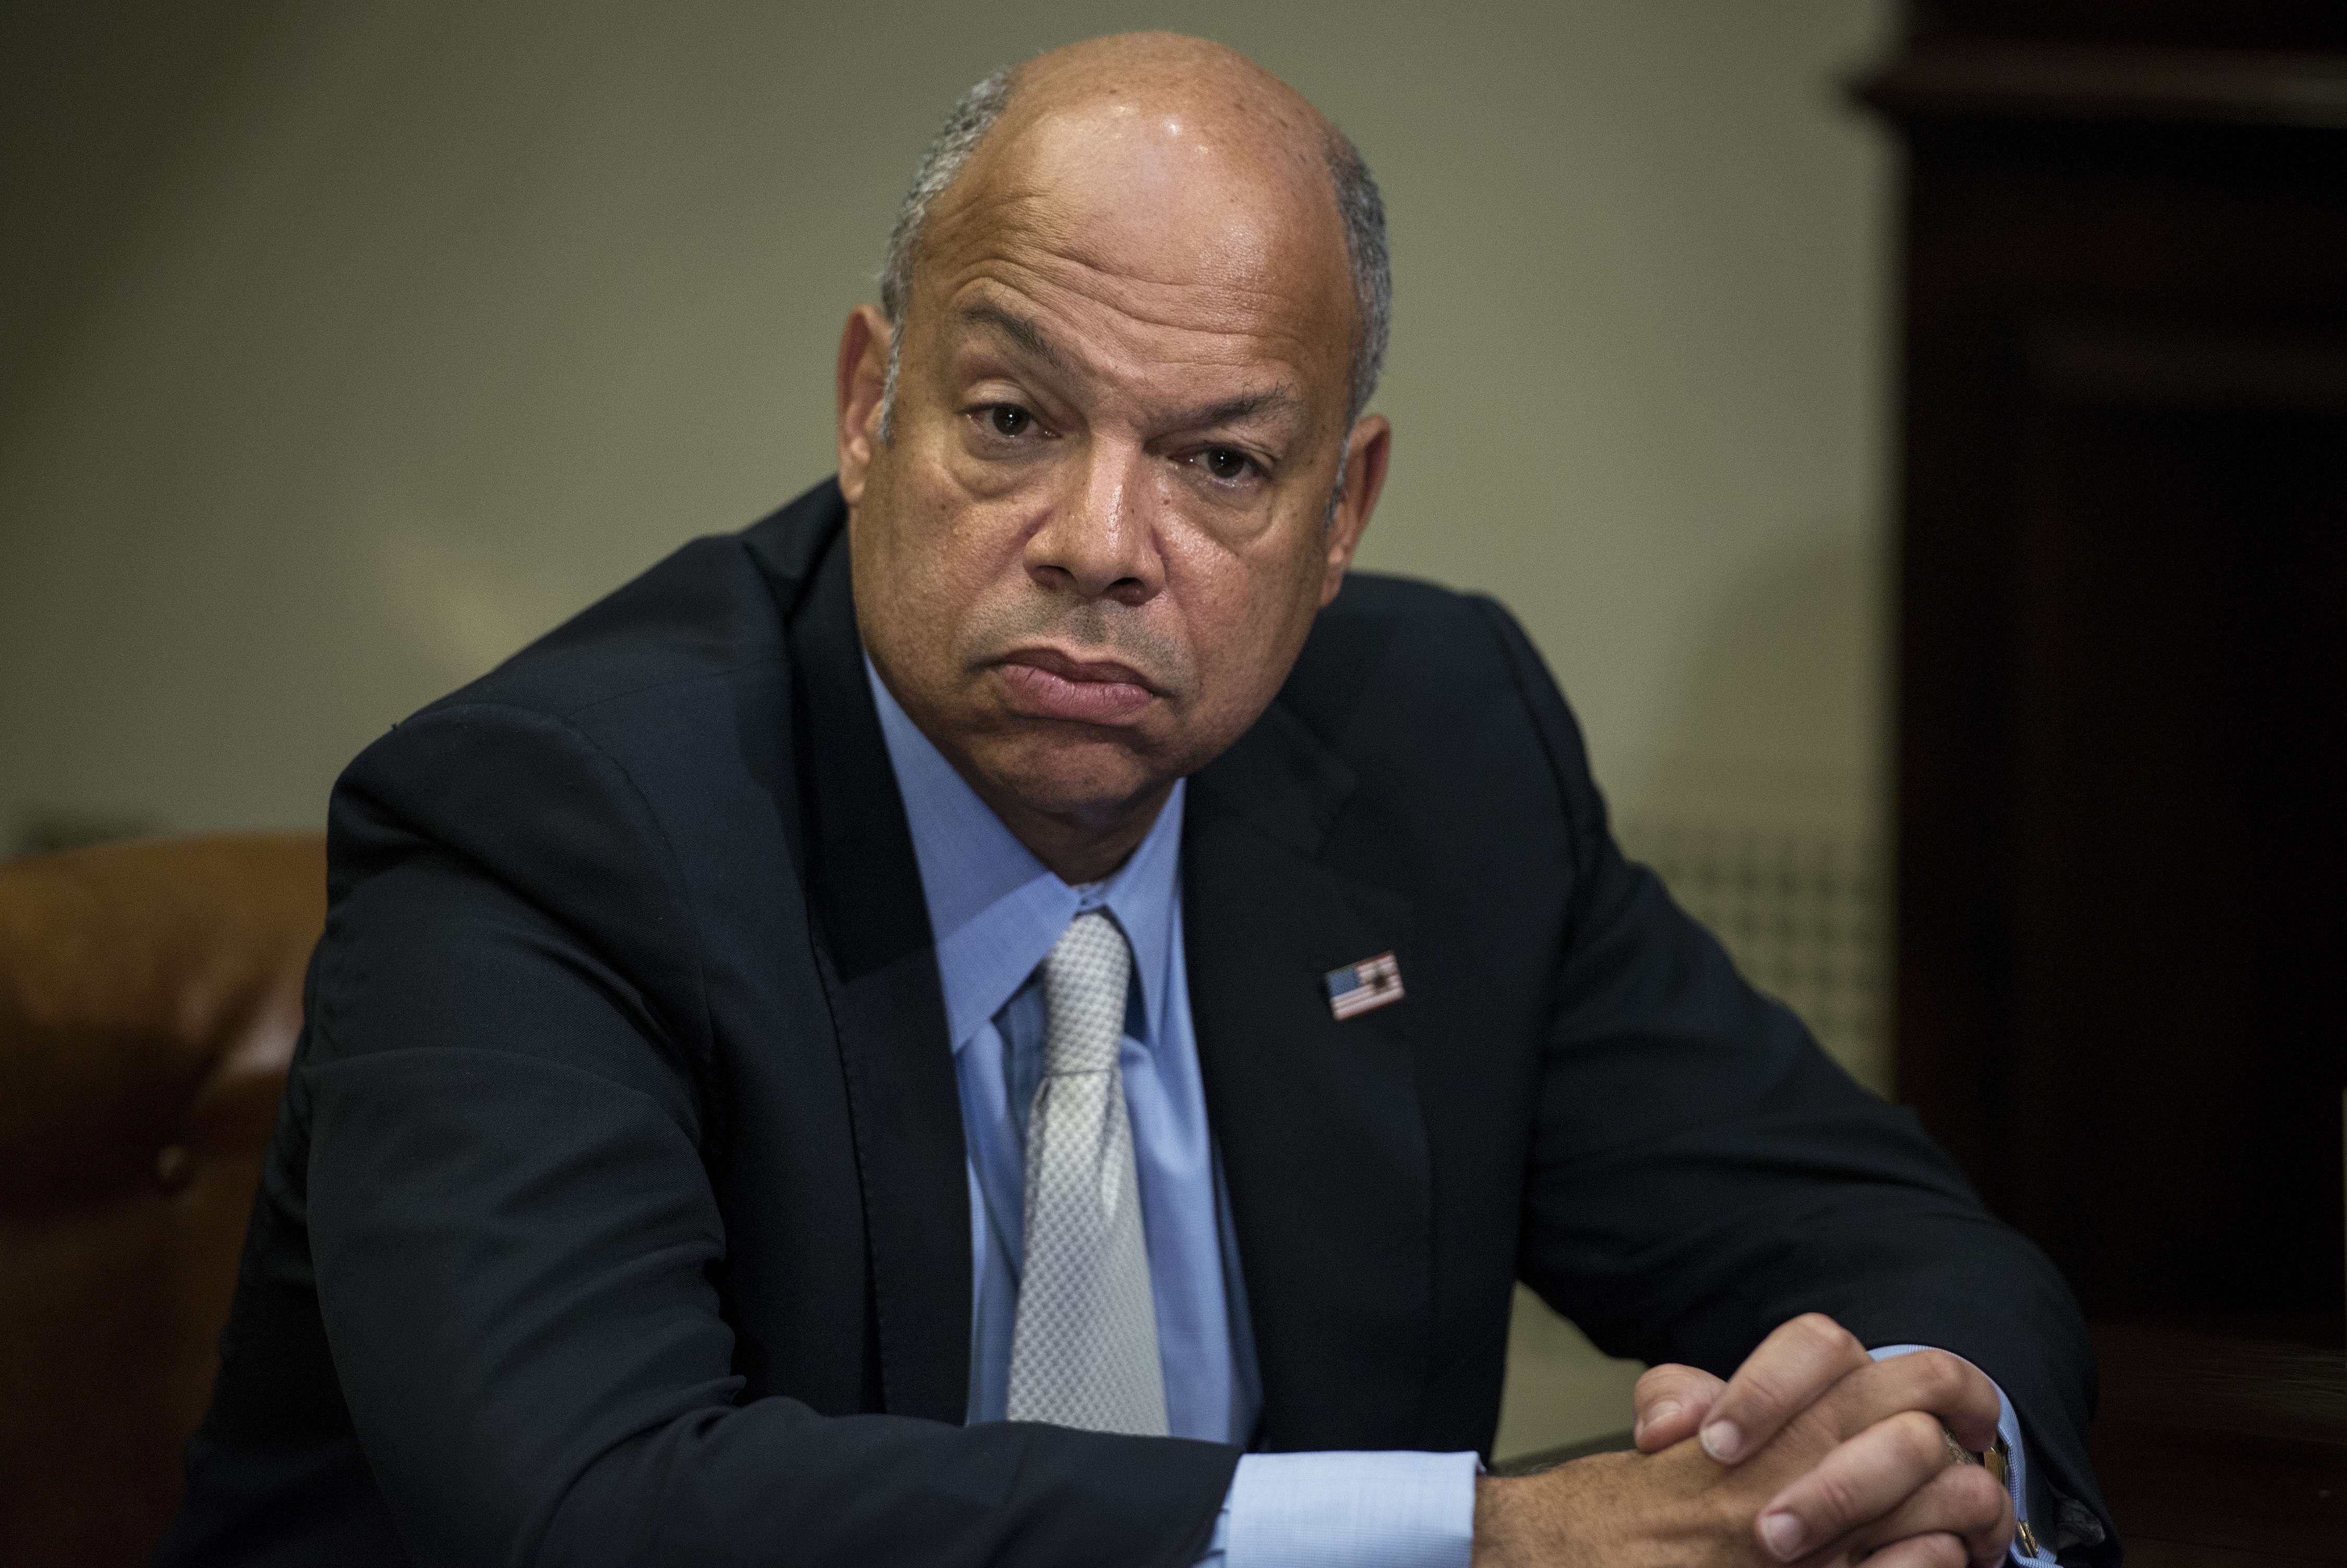 US Secretary of Homeland Security Jeh Johnson listens while US President Barack Obama makes a statement to the press after a meeting in the Roosevelt Room of the White House on Oct. 6, 2014 in Washington, DC. (Brendan Smialowski—AFP/Getty Images)